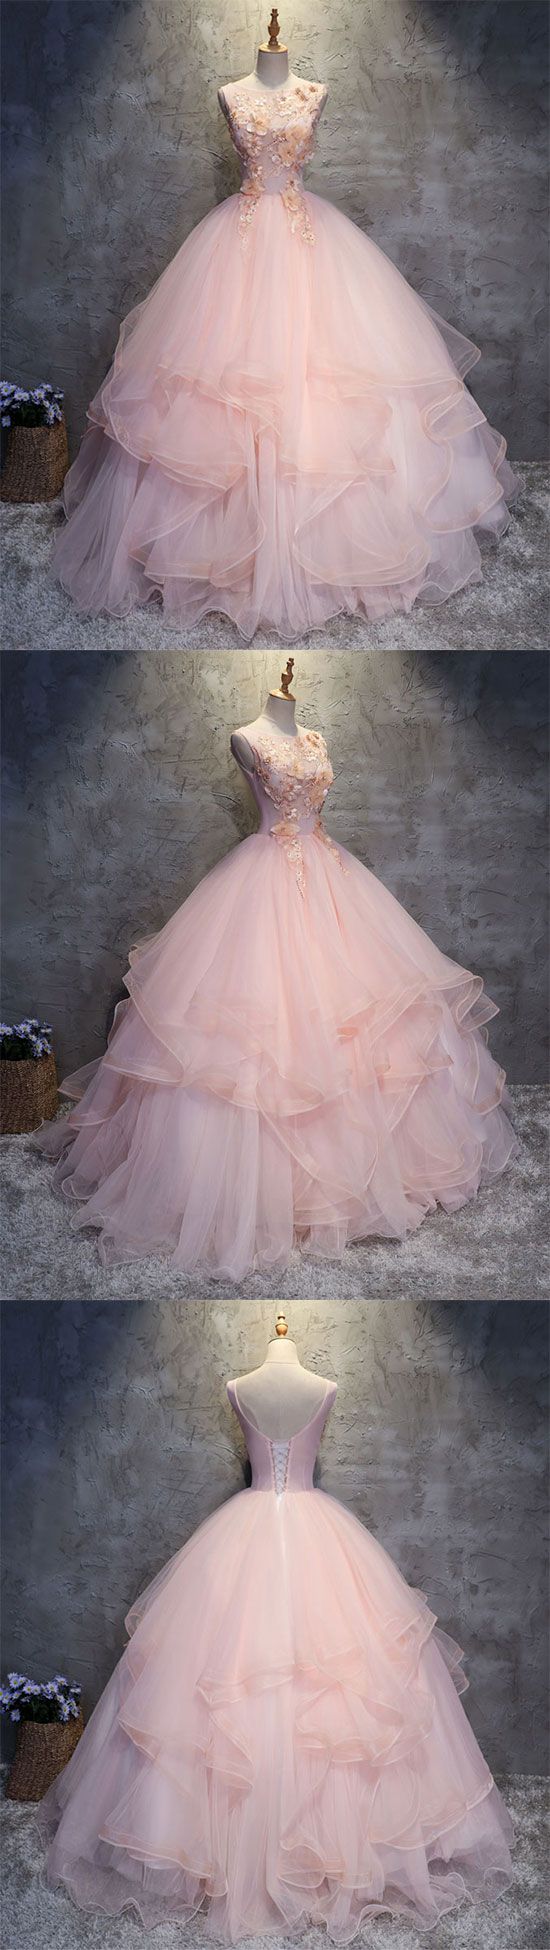 Pink Round Neck Tulle Lace Applique Long Prom Dress, Pink Evening Dress ...